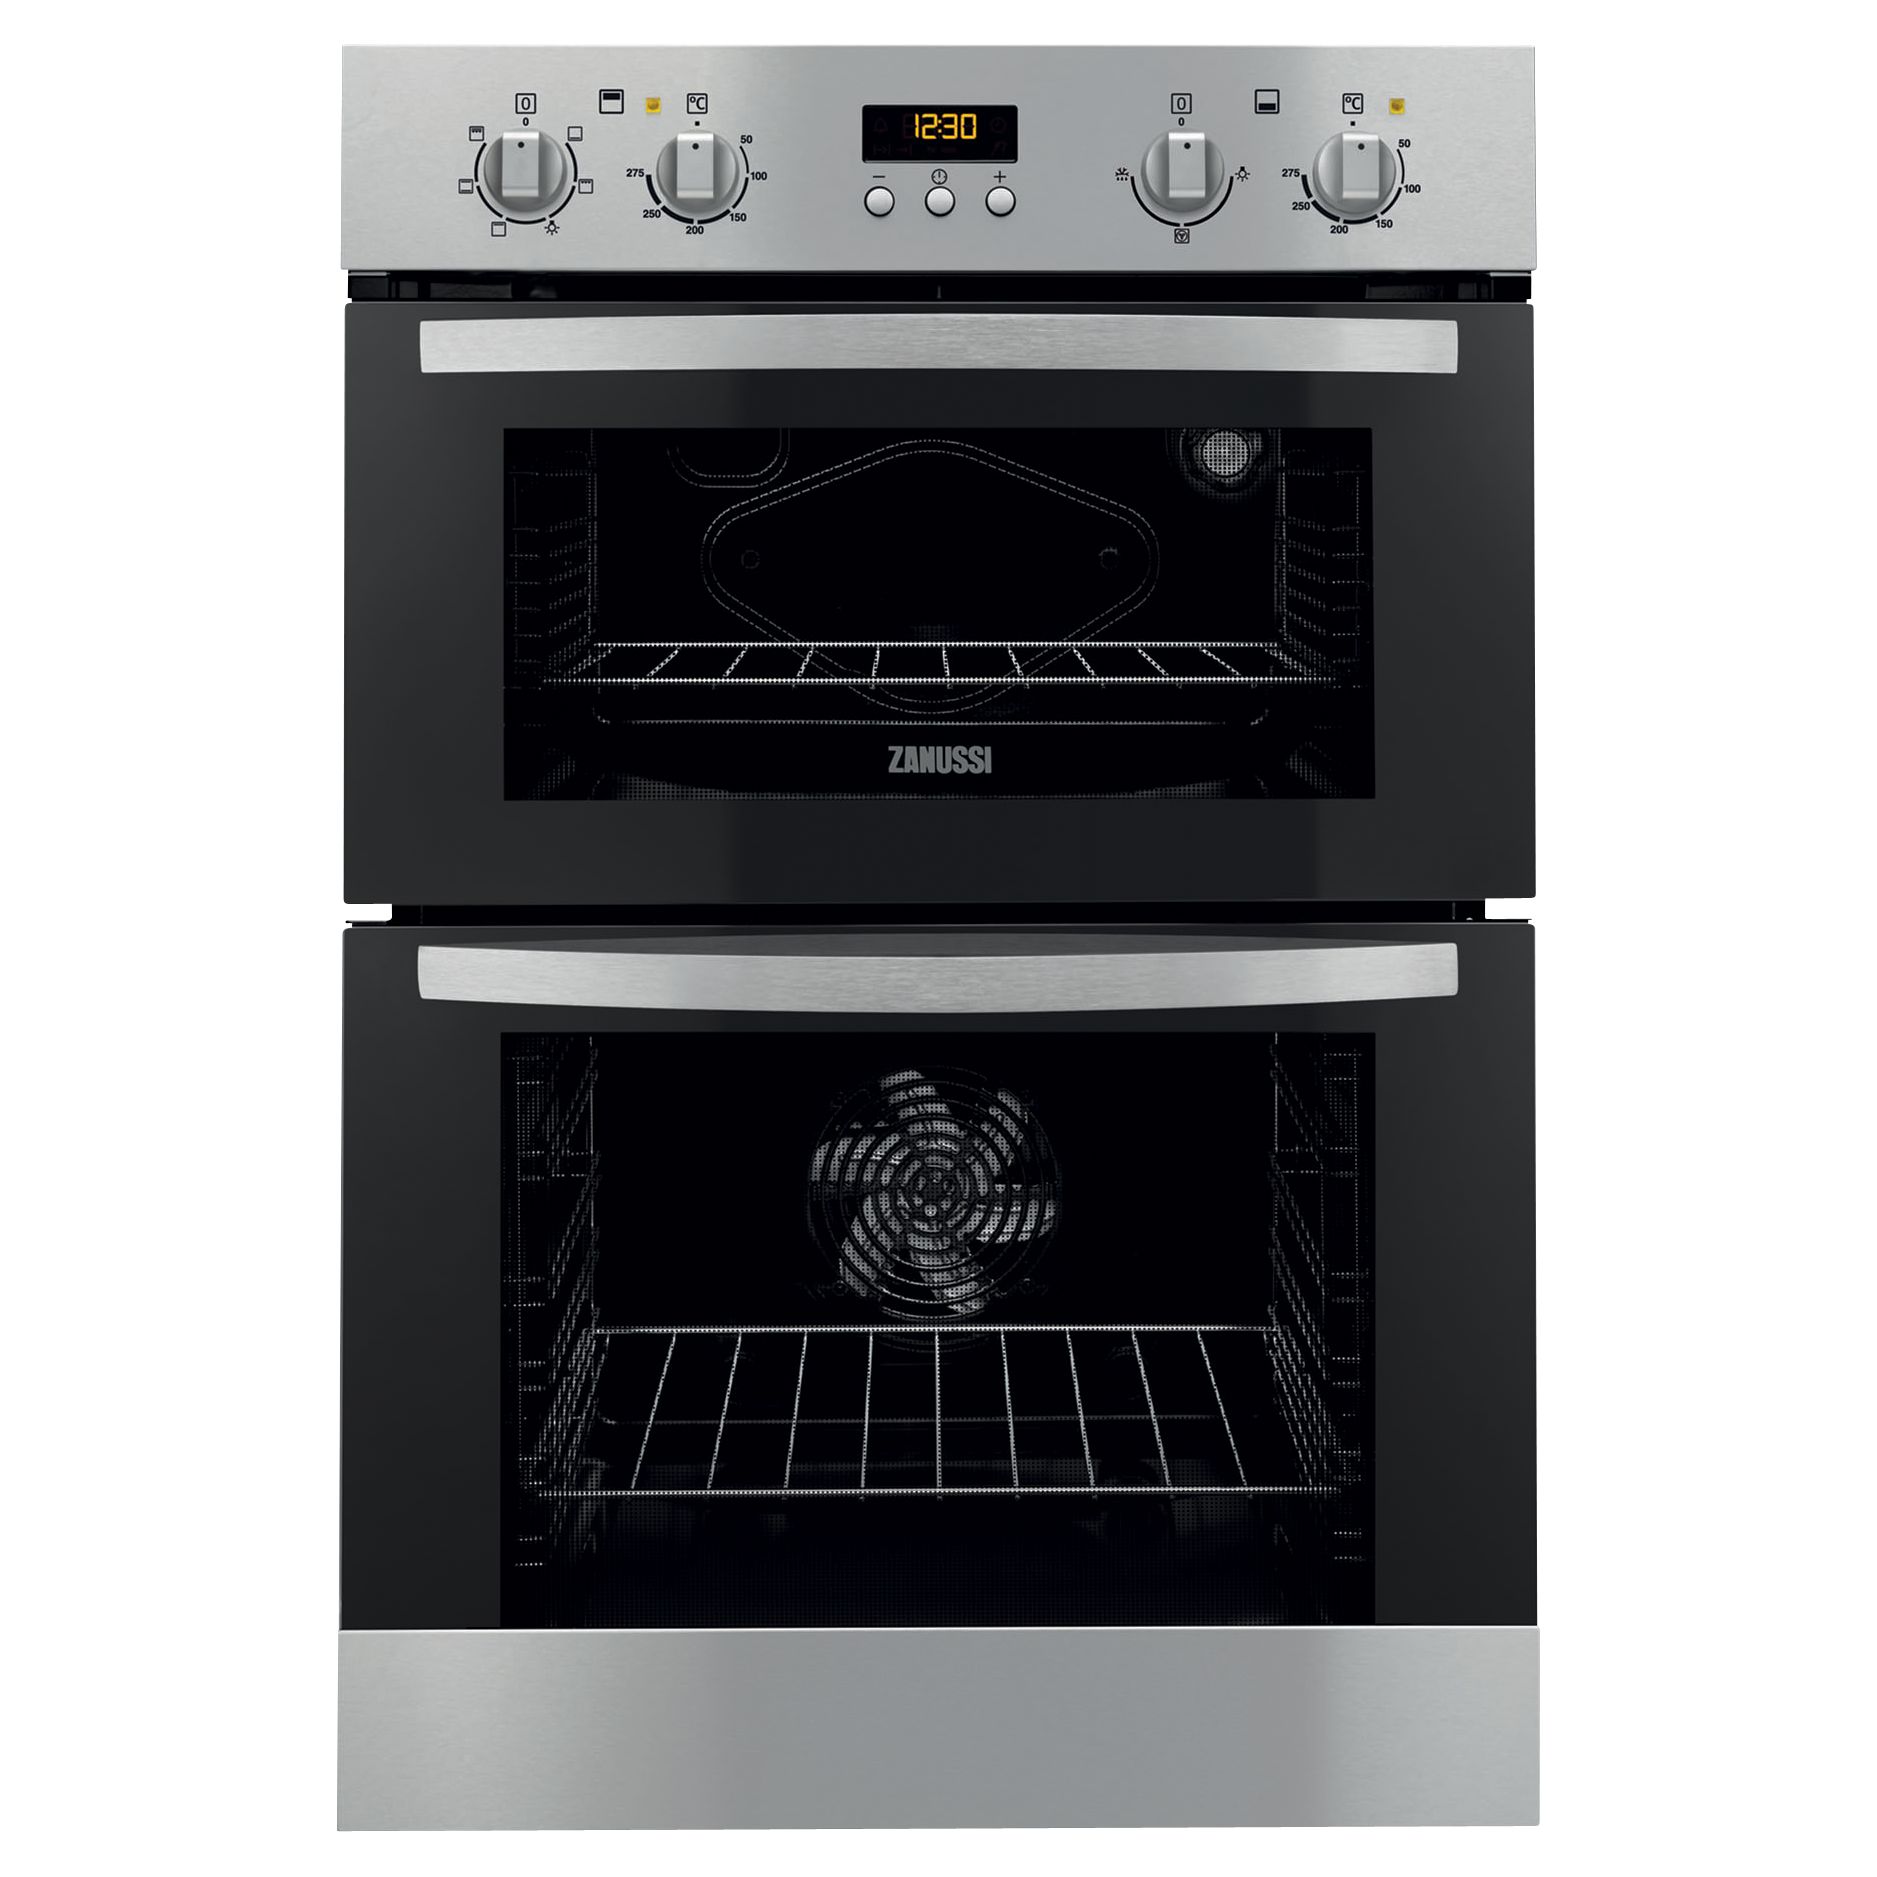 Zanussi ZOD35511XK Built-In Double Electric Oven, Stainless Steel